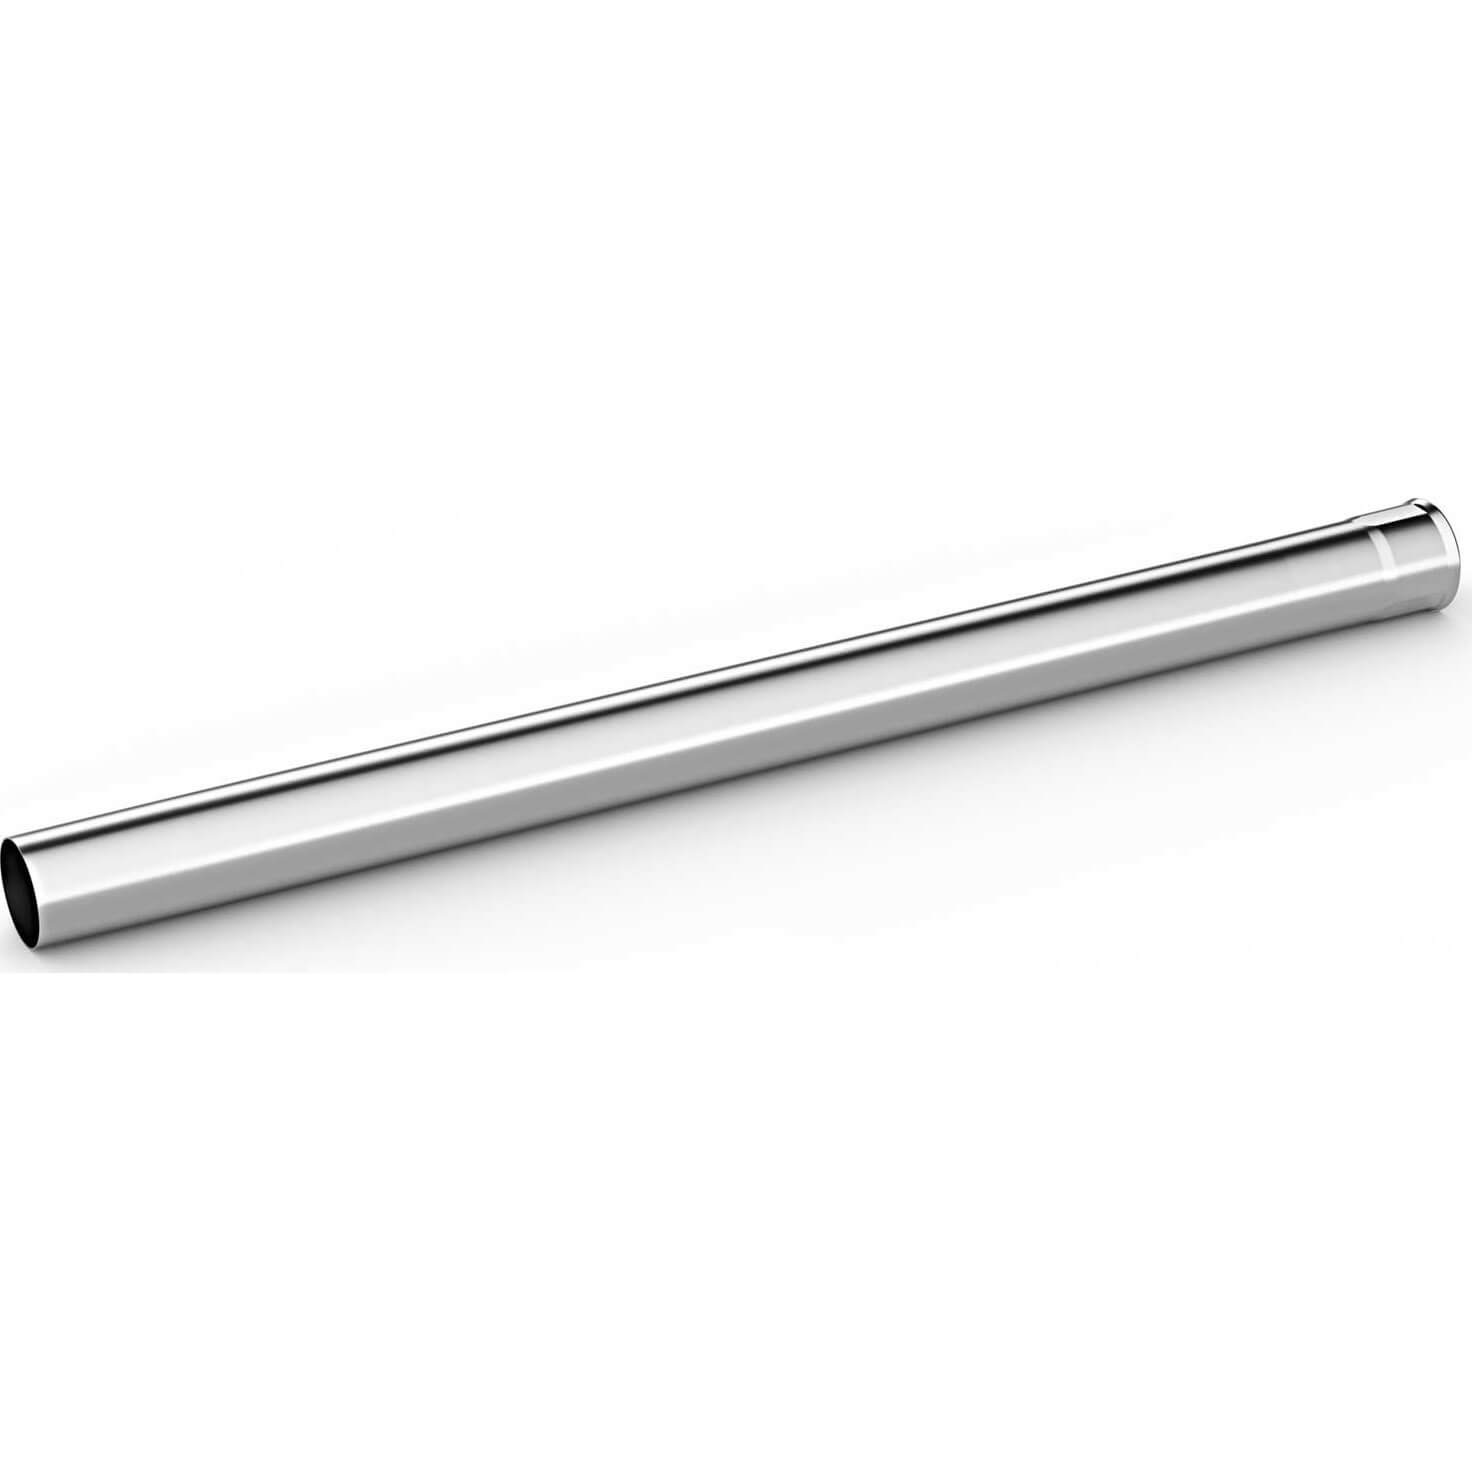 Image of Karcher Stainless Steel Suction Tubes for NT 30/1 and 40/1 Vacuum Cleaners 0.5m Pack of 2